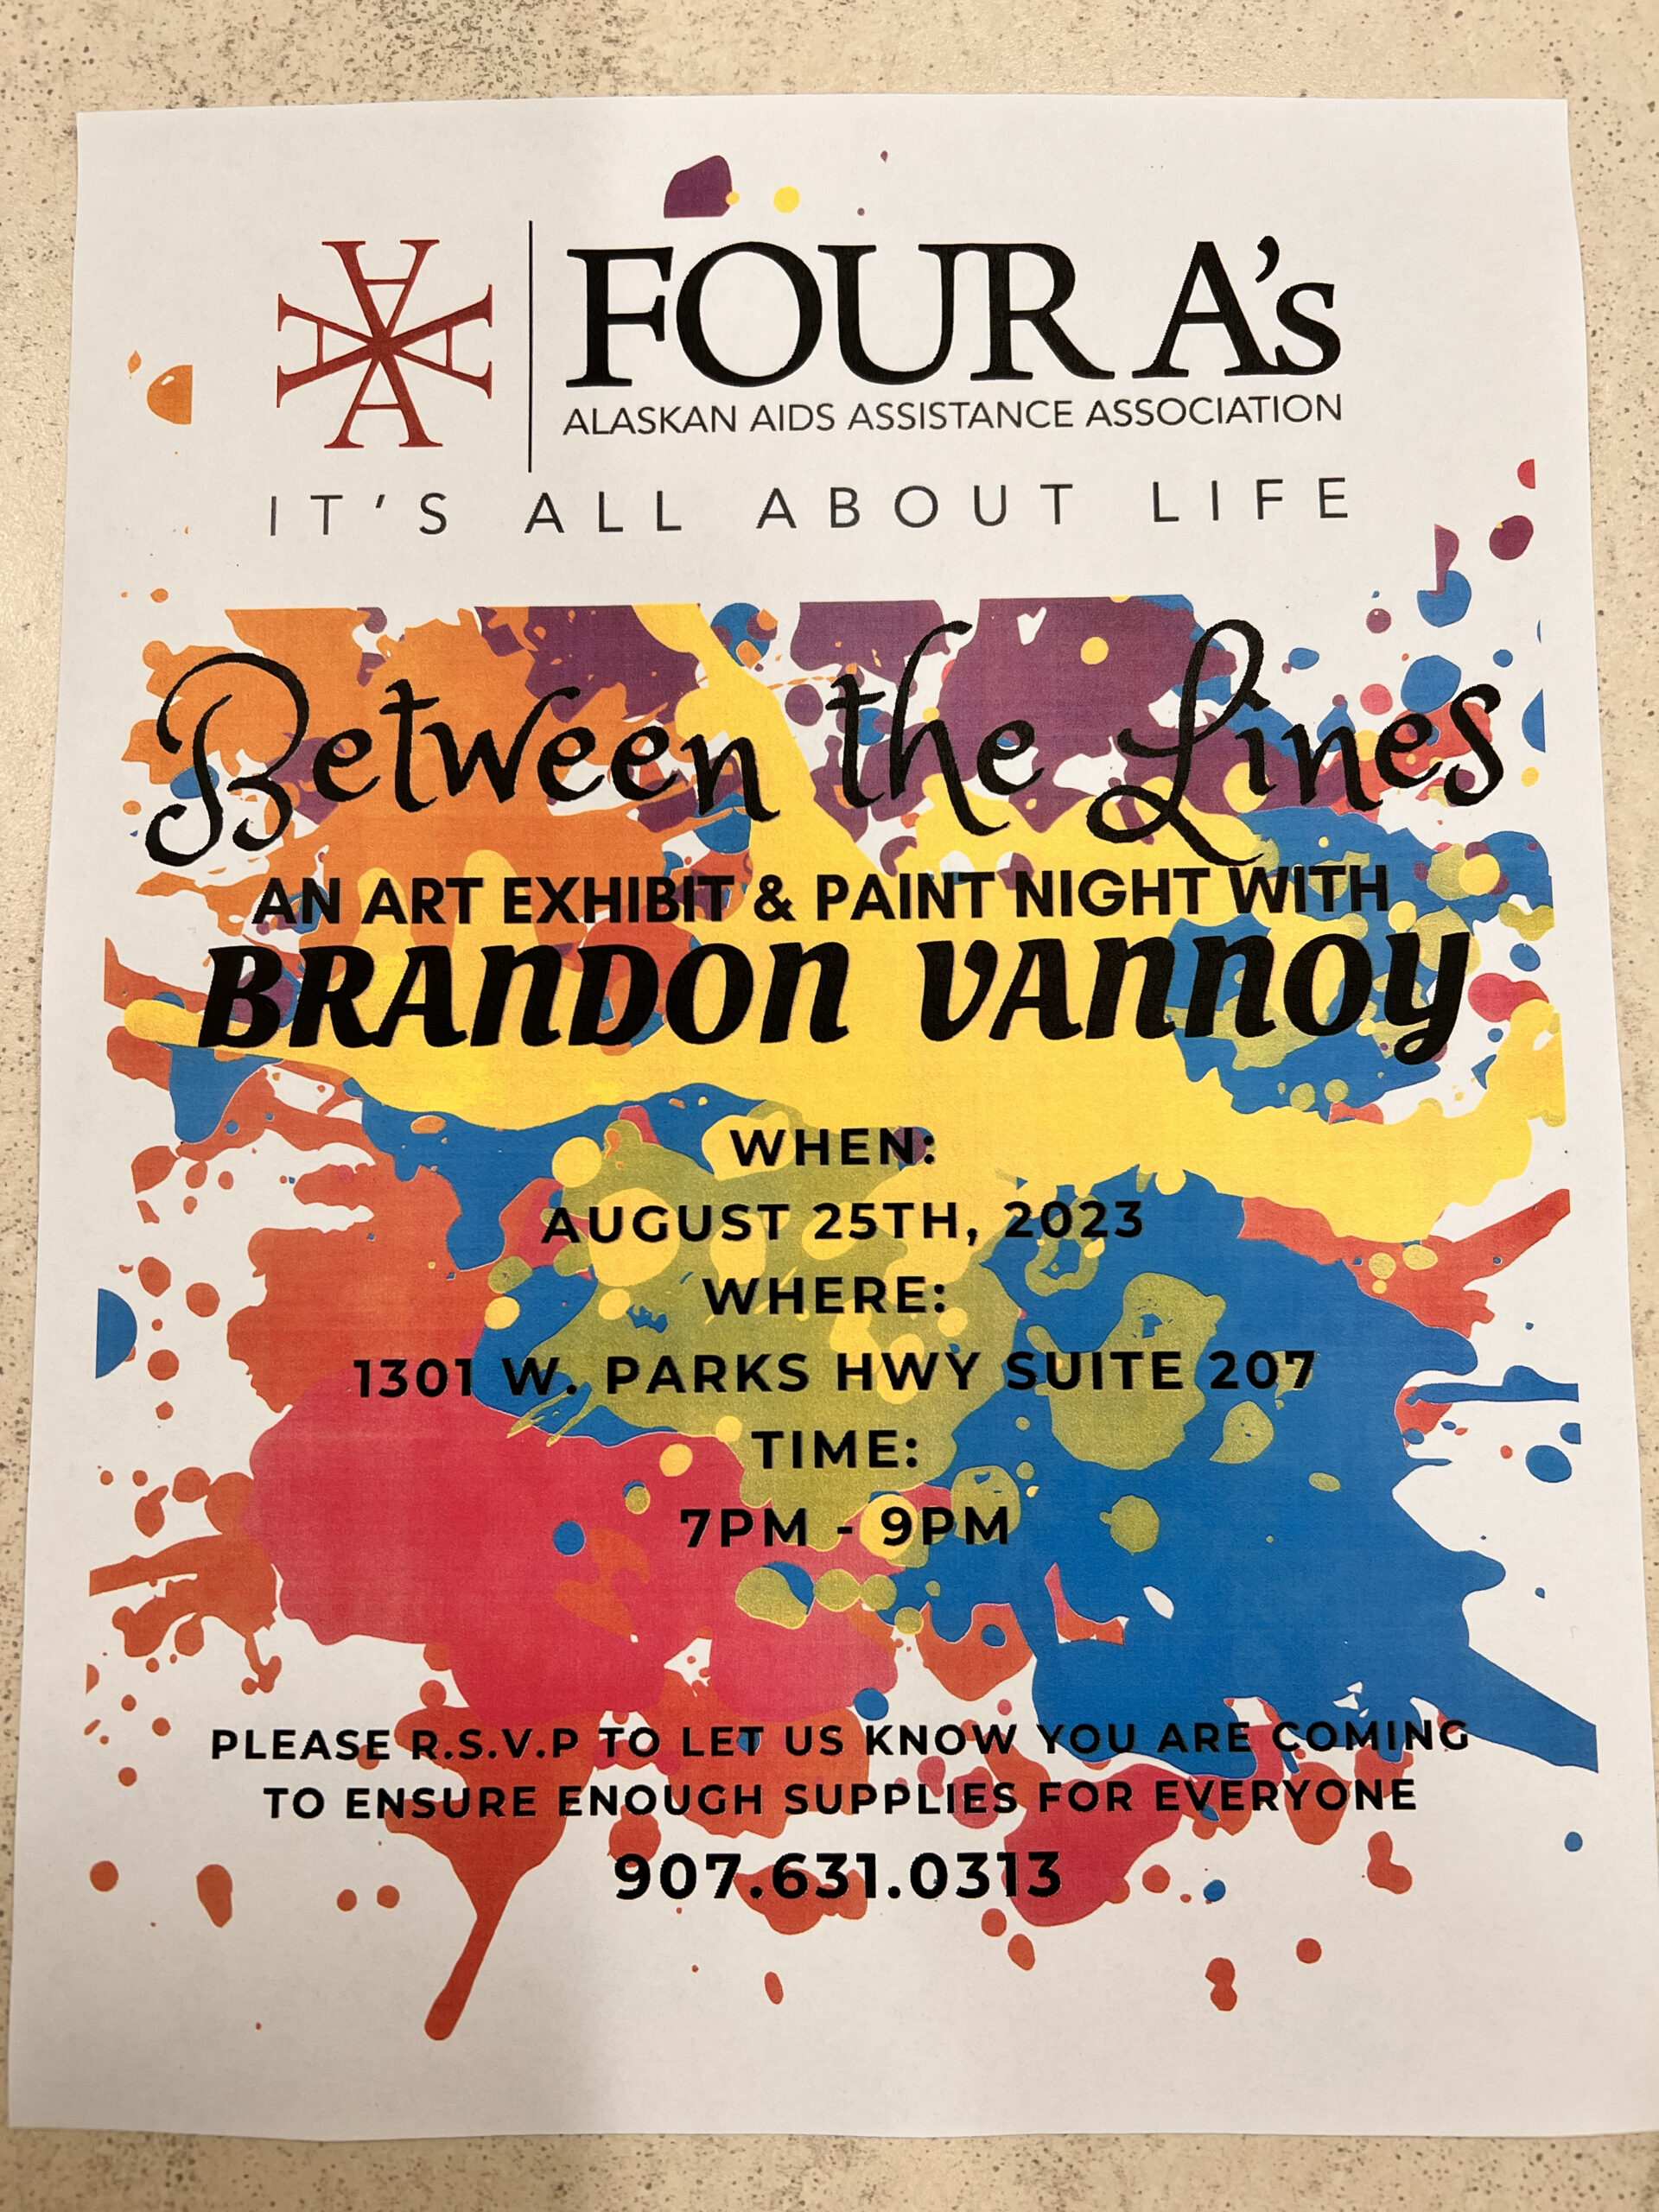 Paint Night & Art Exhibit Flyer hosted by Four A's